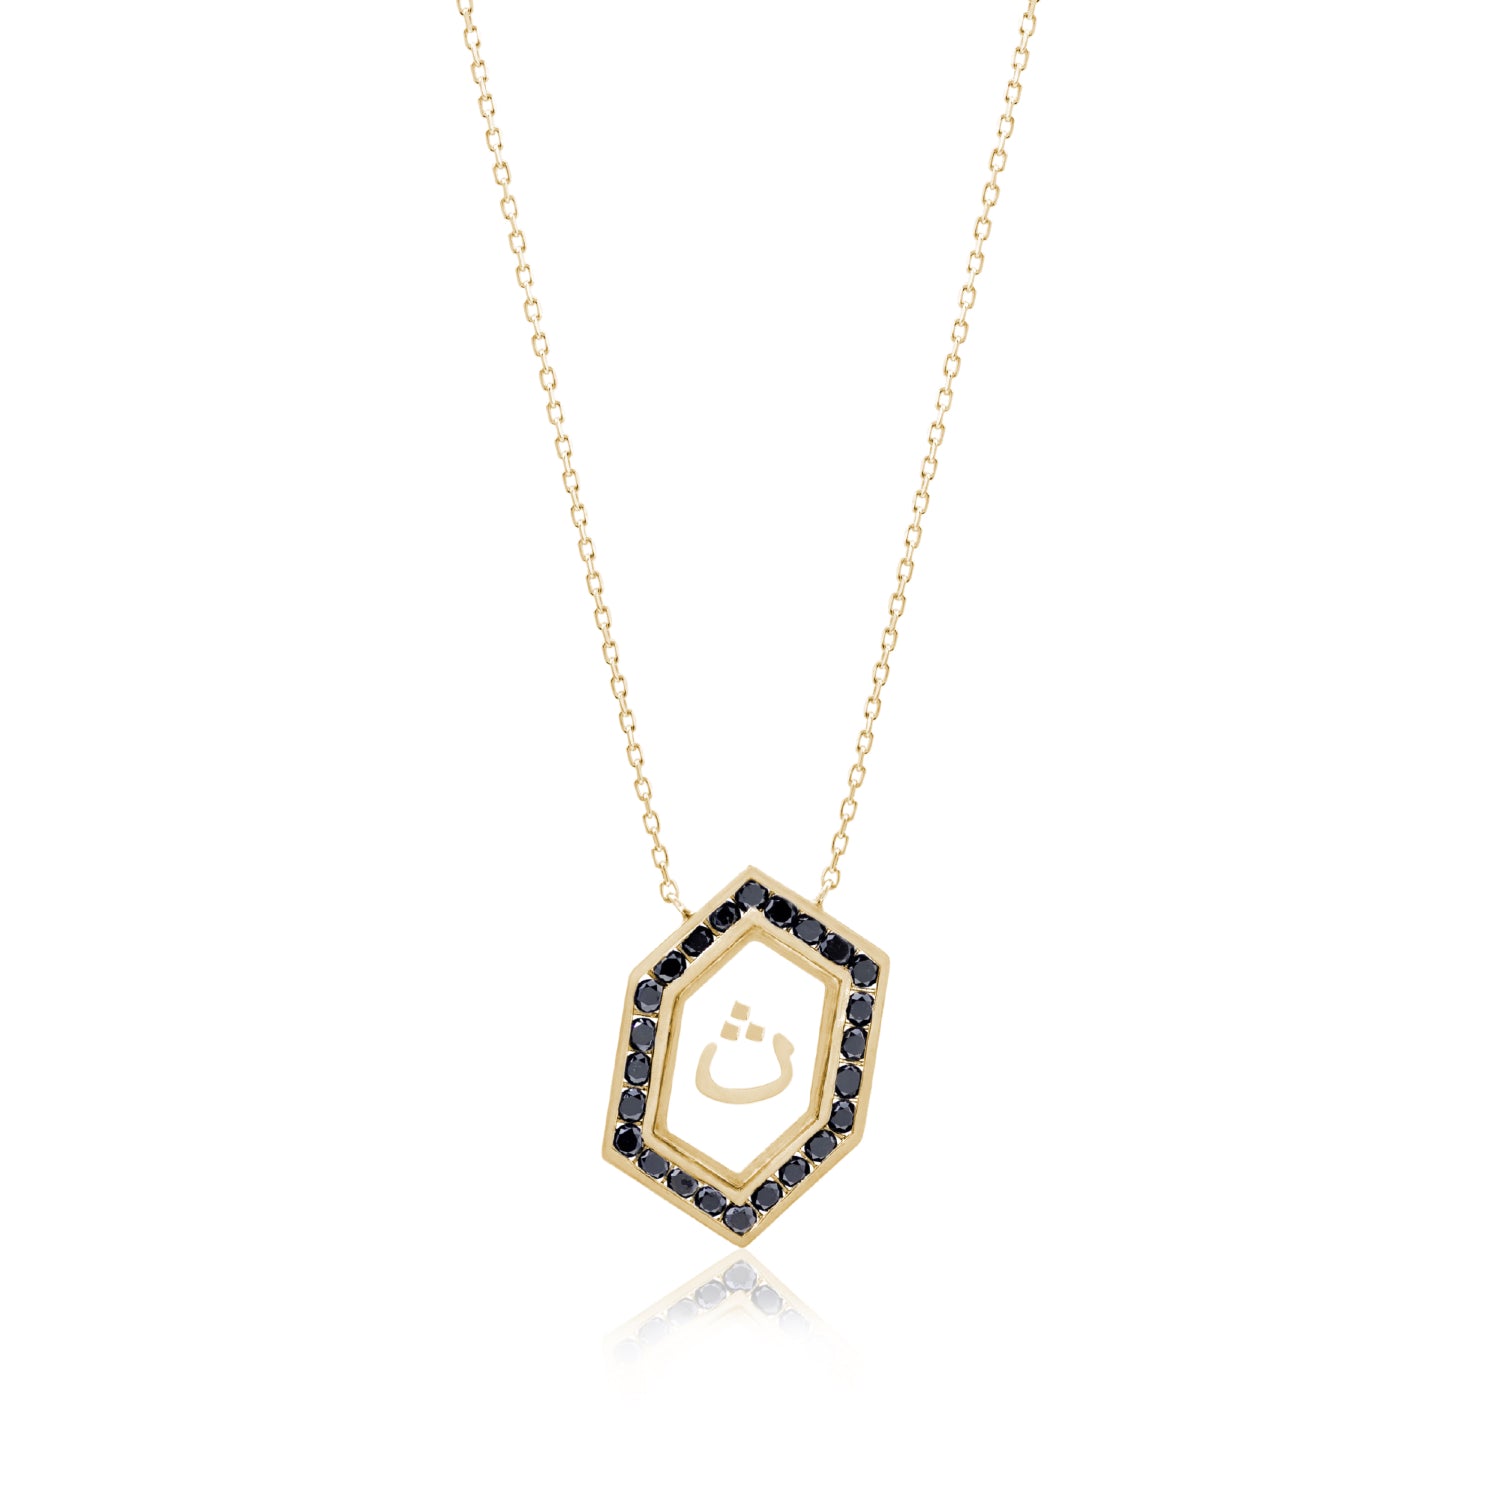 Qamoos 1.0 Letter ث Black Diamond Necklace in Yellow Gold